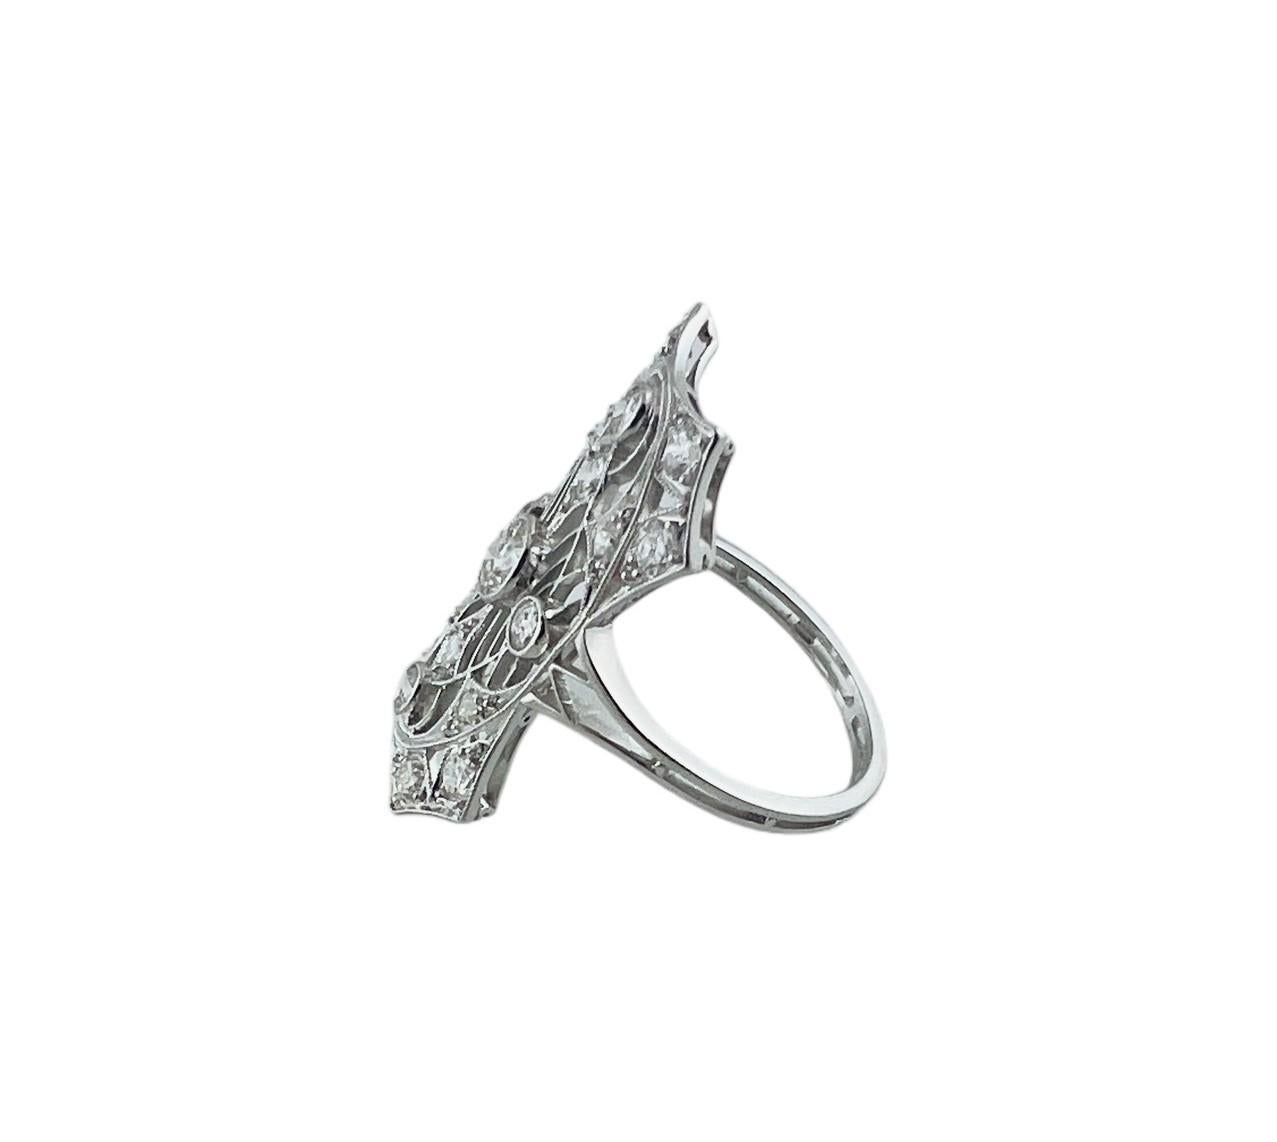 Vintage Platinum and Diamond Long Filigree Ring Size 6.5 #16761 In Good Condition For Sale In Washington Depot, CT